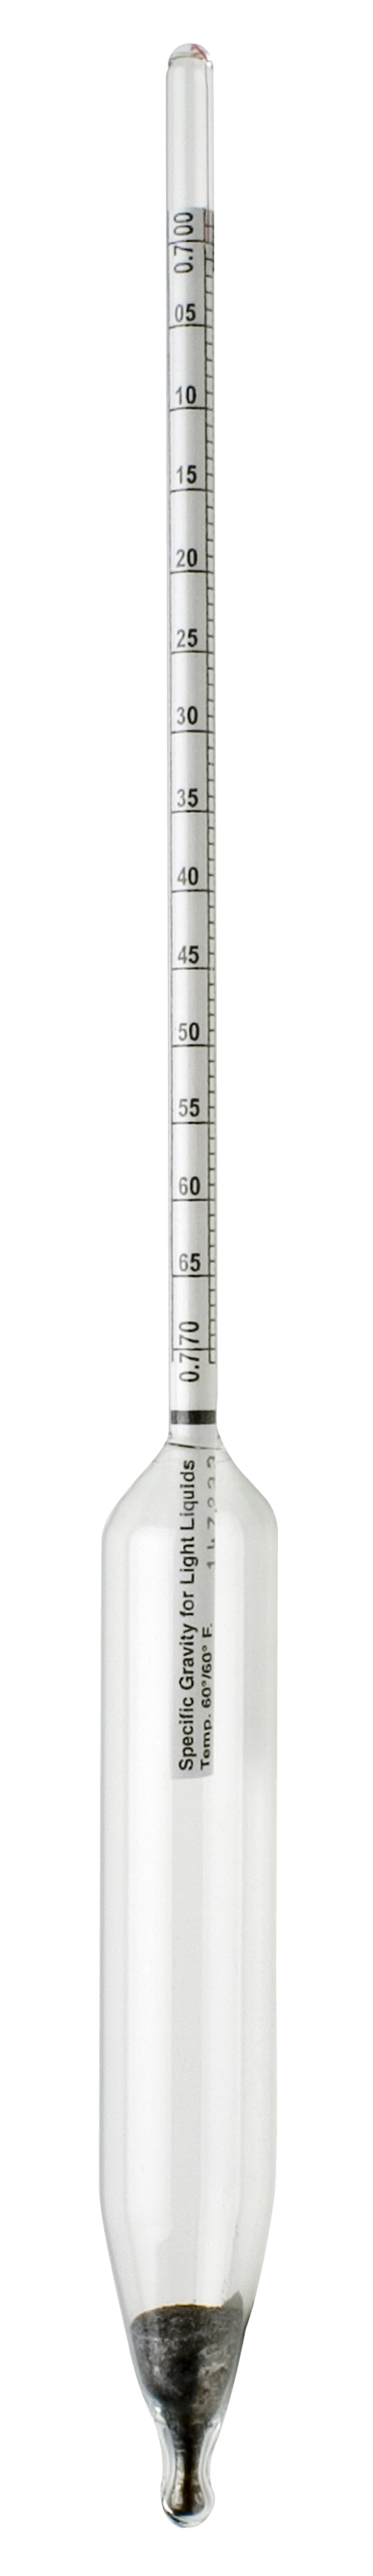 H-B DURAC Specific Gravity / Relative Density (g/cmᶟ) Precision Hydrometers; Traceable to NIST